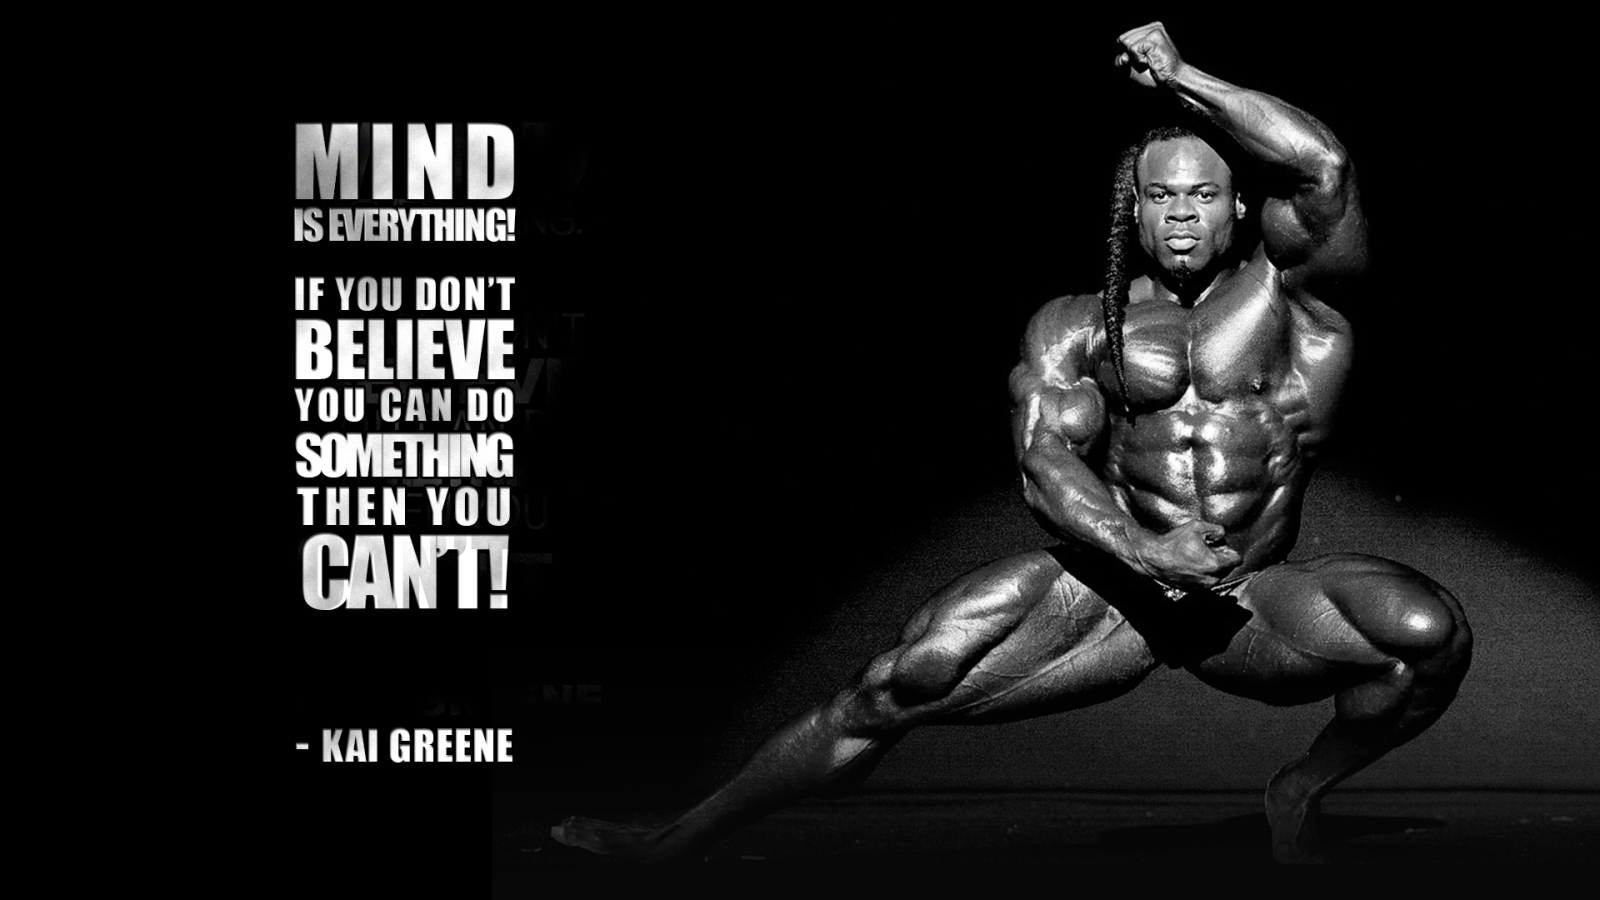 Best Bodybuilding Quotes For Motivating You In The Gym Born To Workout